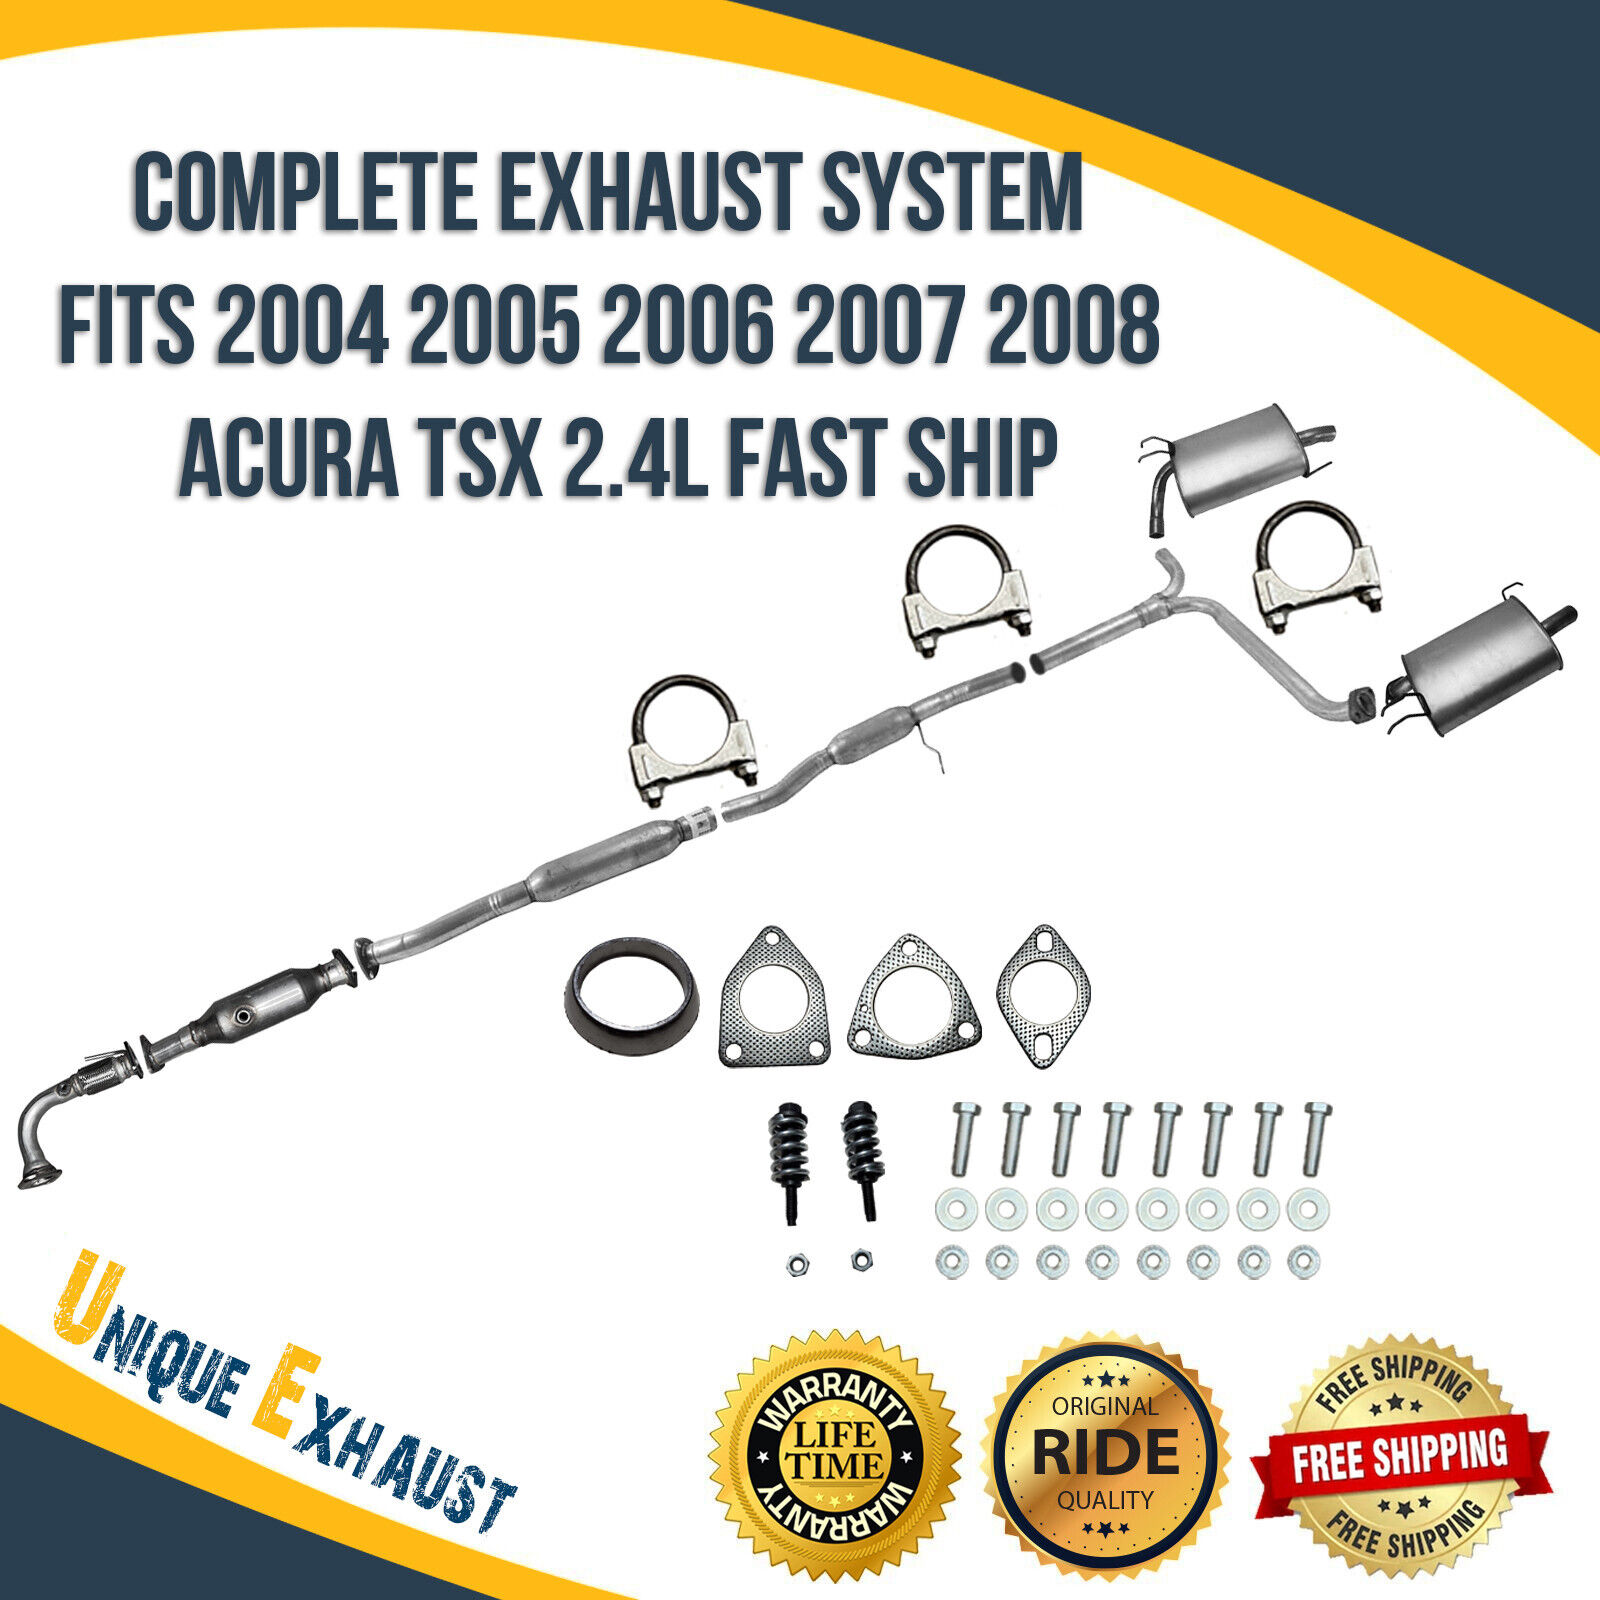 Complete Exhaust System Fits 2004 2005 2006 2007 2008 Acura TSX 2.4L Fast Ship